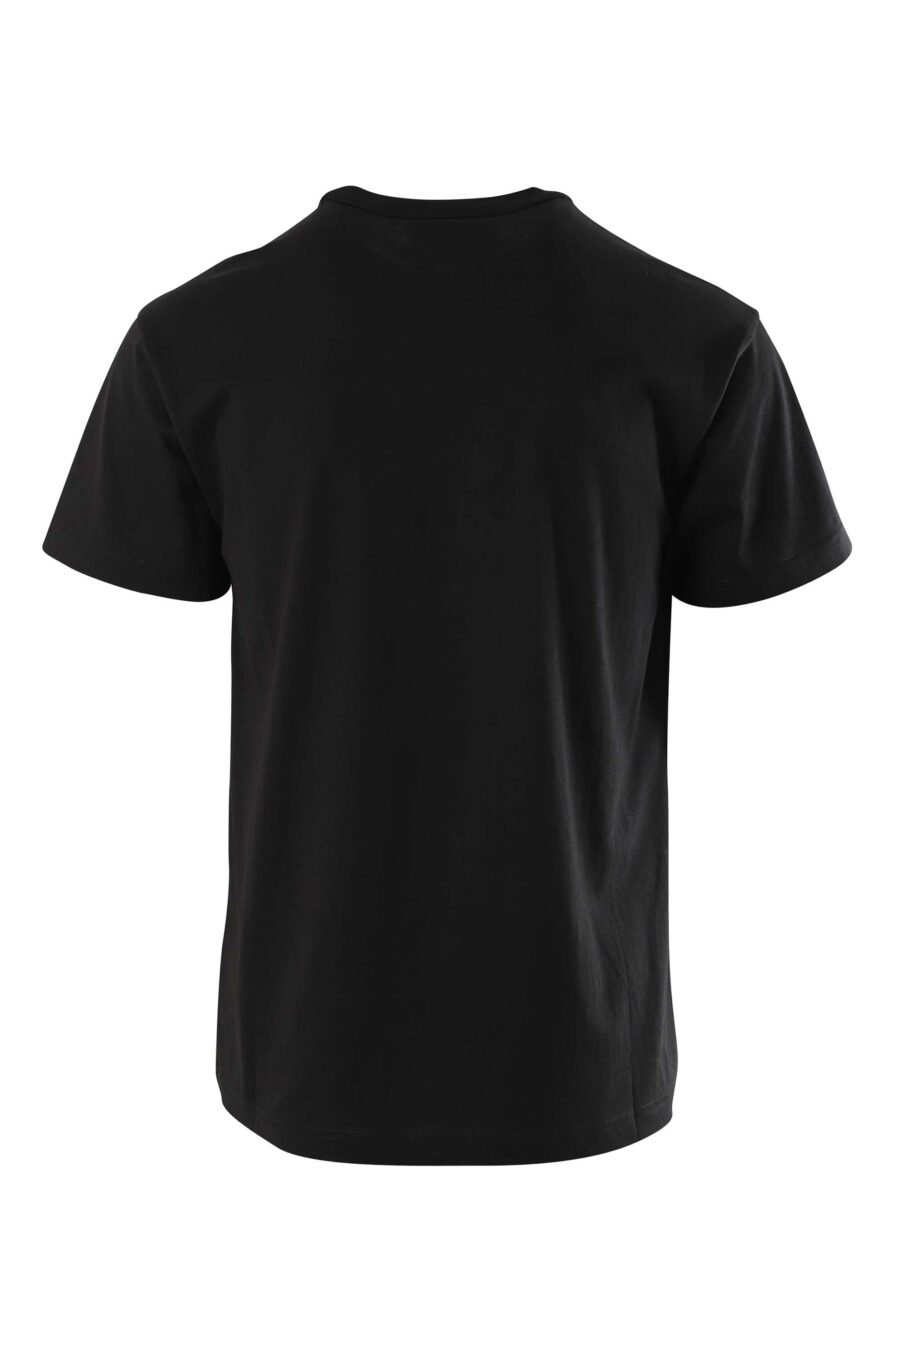 Black T-shirt with contrasting maxilogue - 8052019235449 2